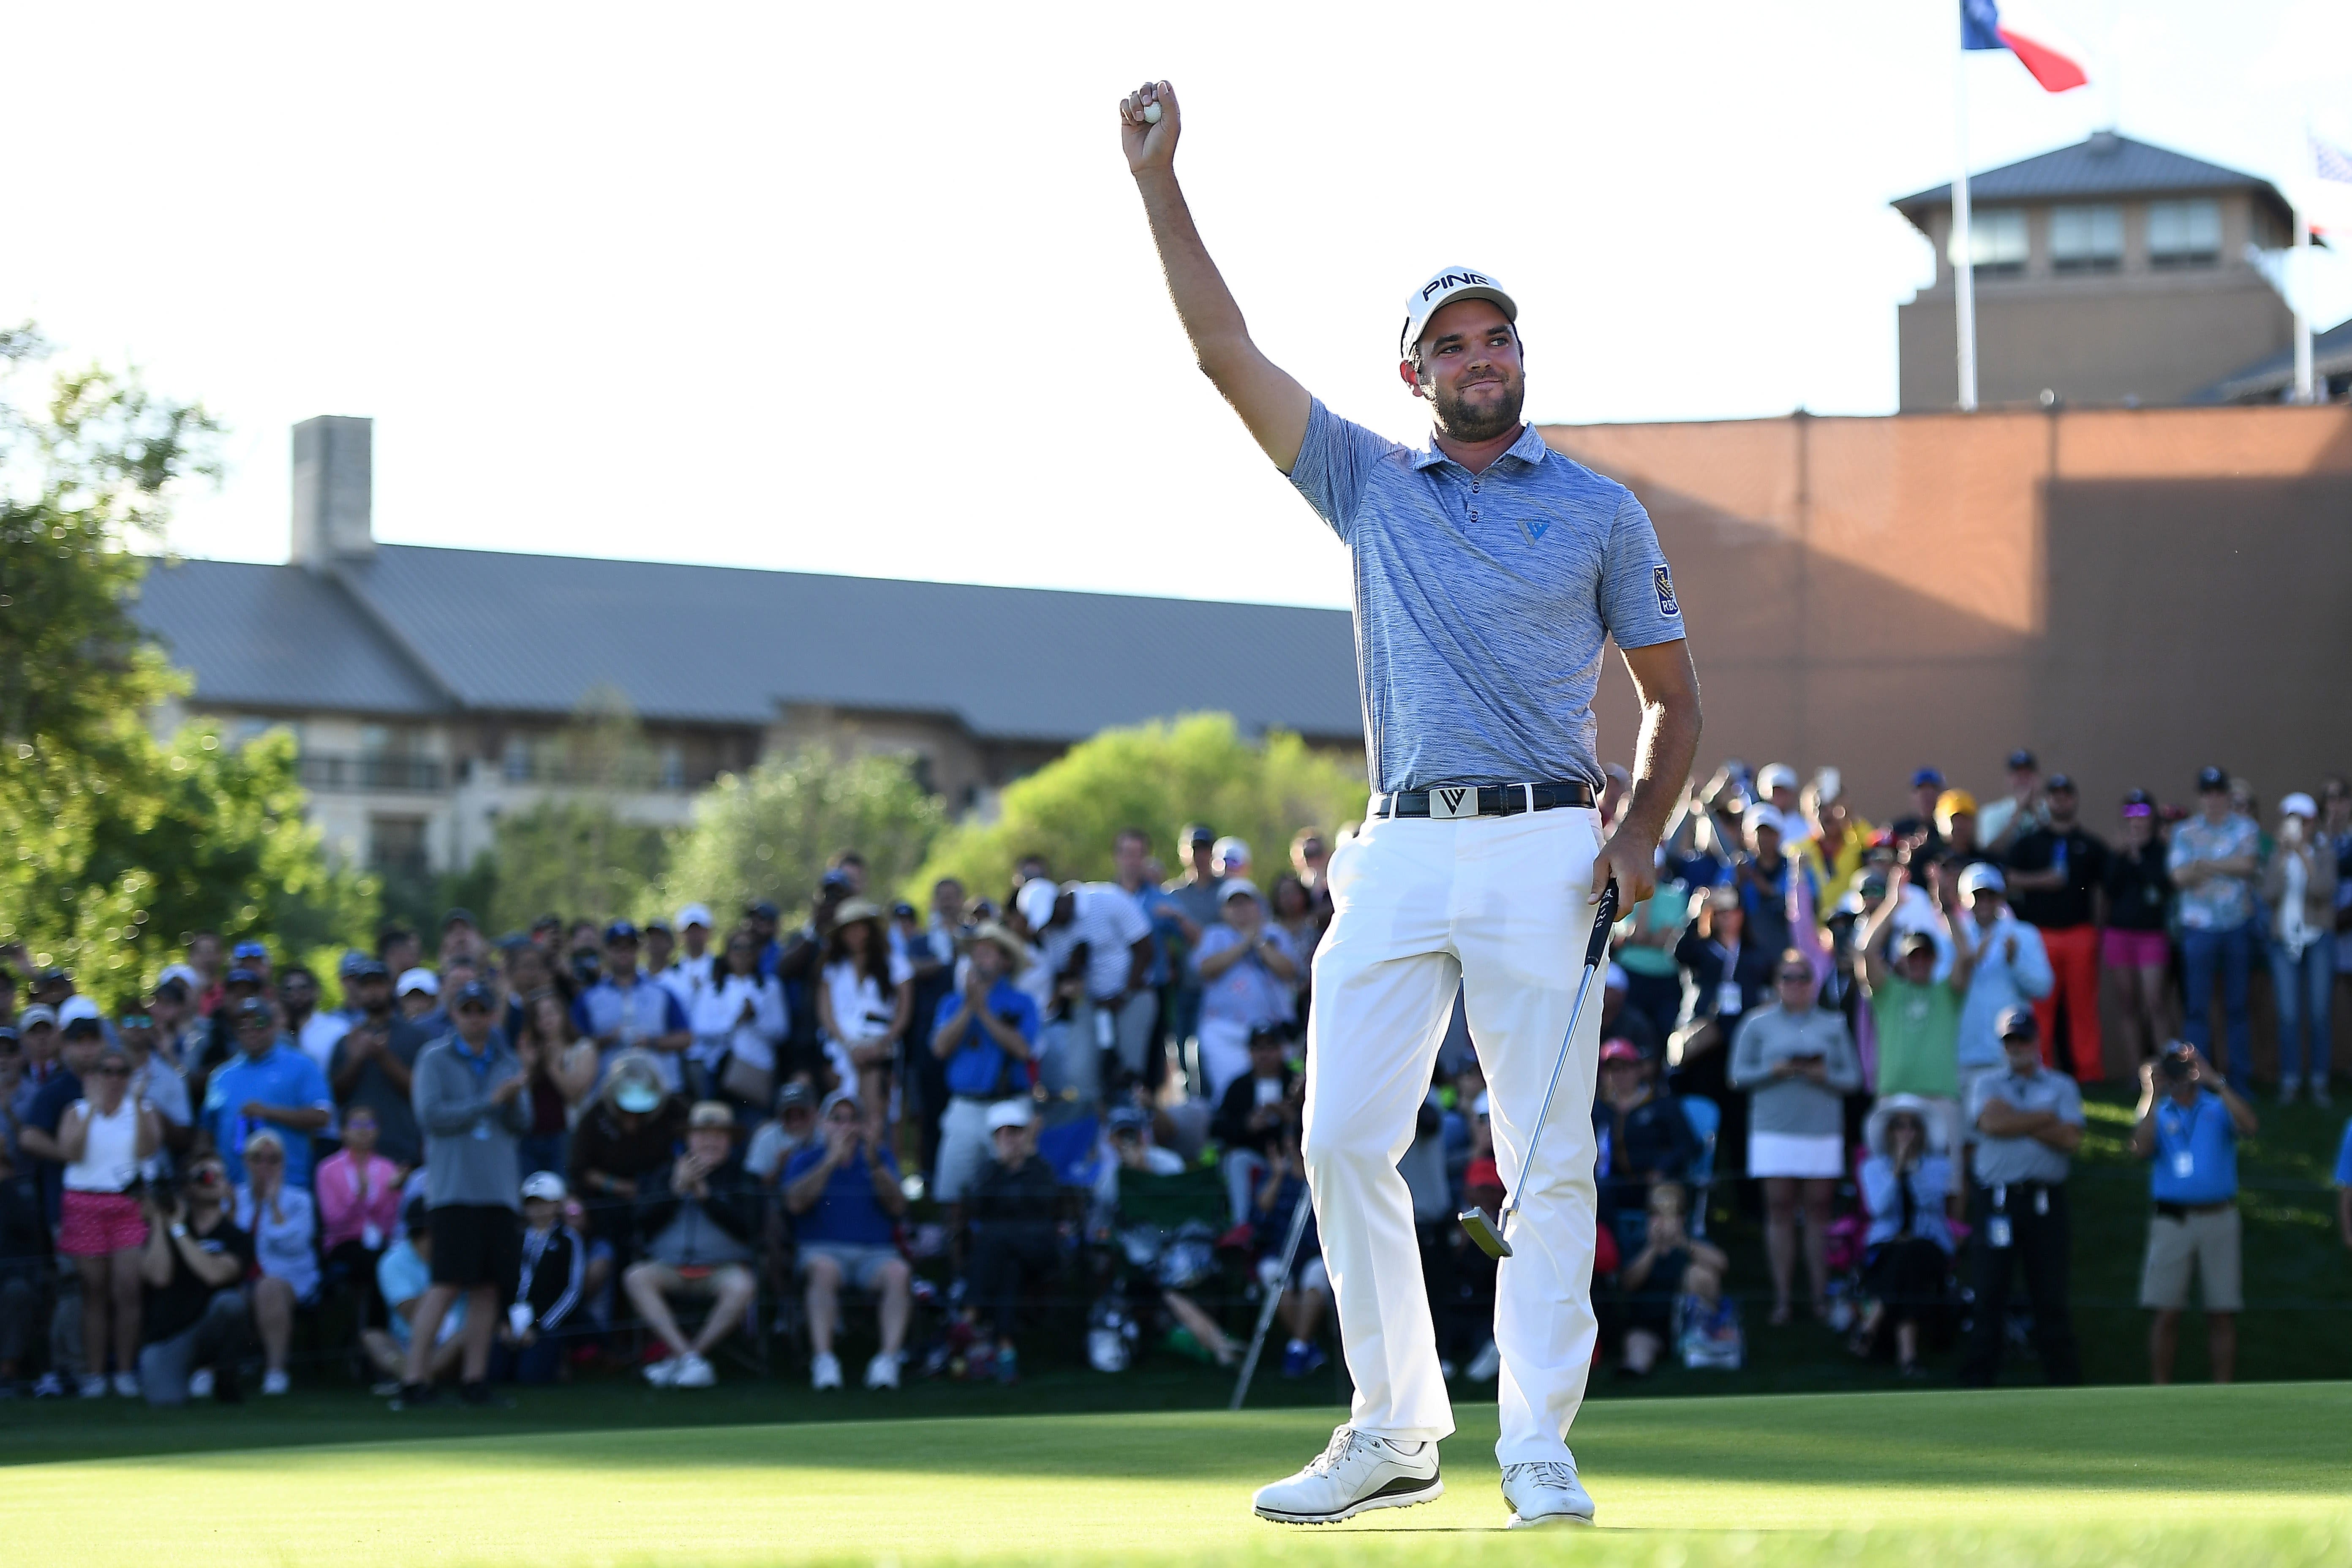 These crazy stats show that Monday qualifying on the PGA Tour was even